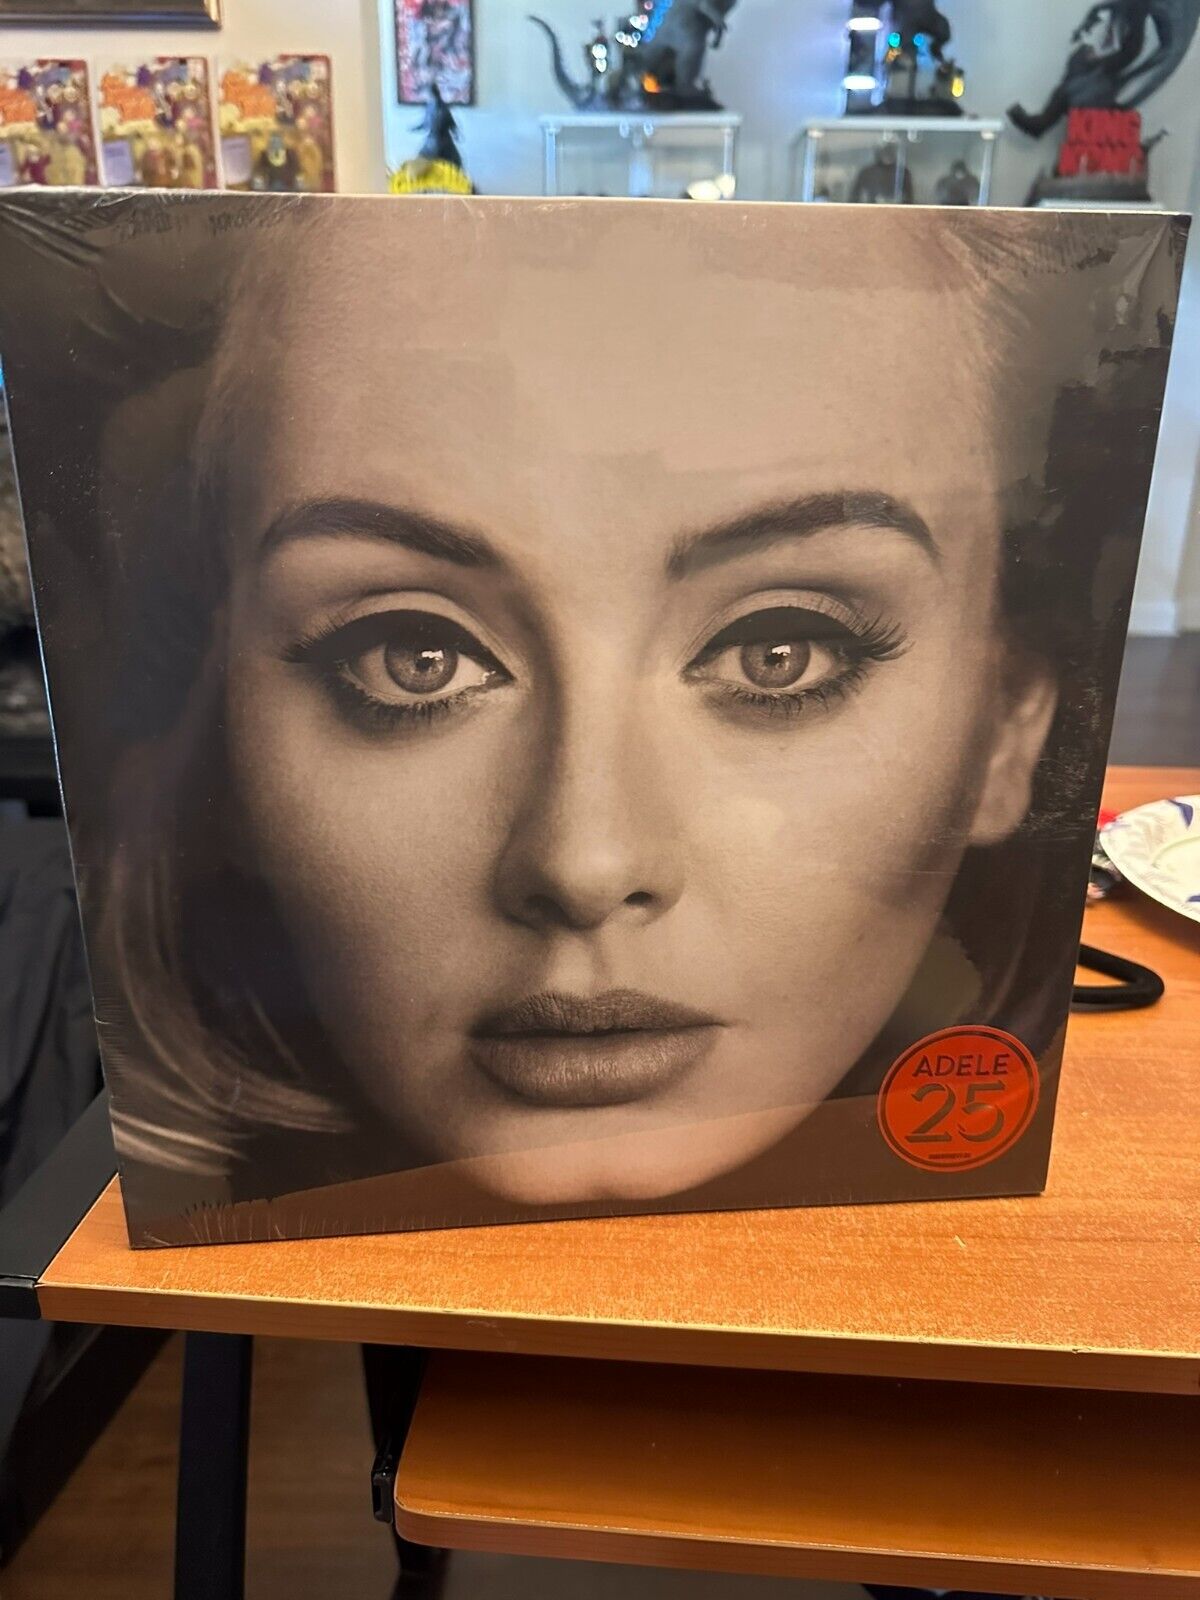 25 by Adele (Record, 2015) brand new sealed